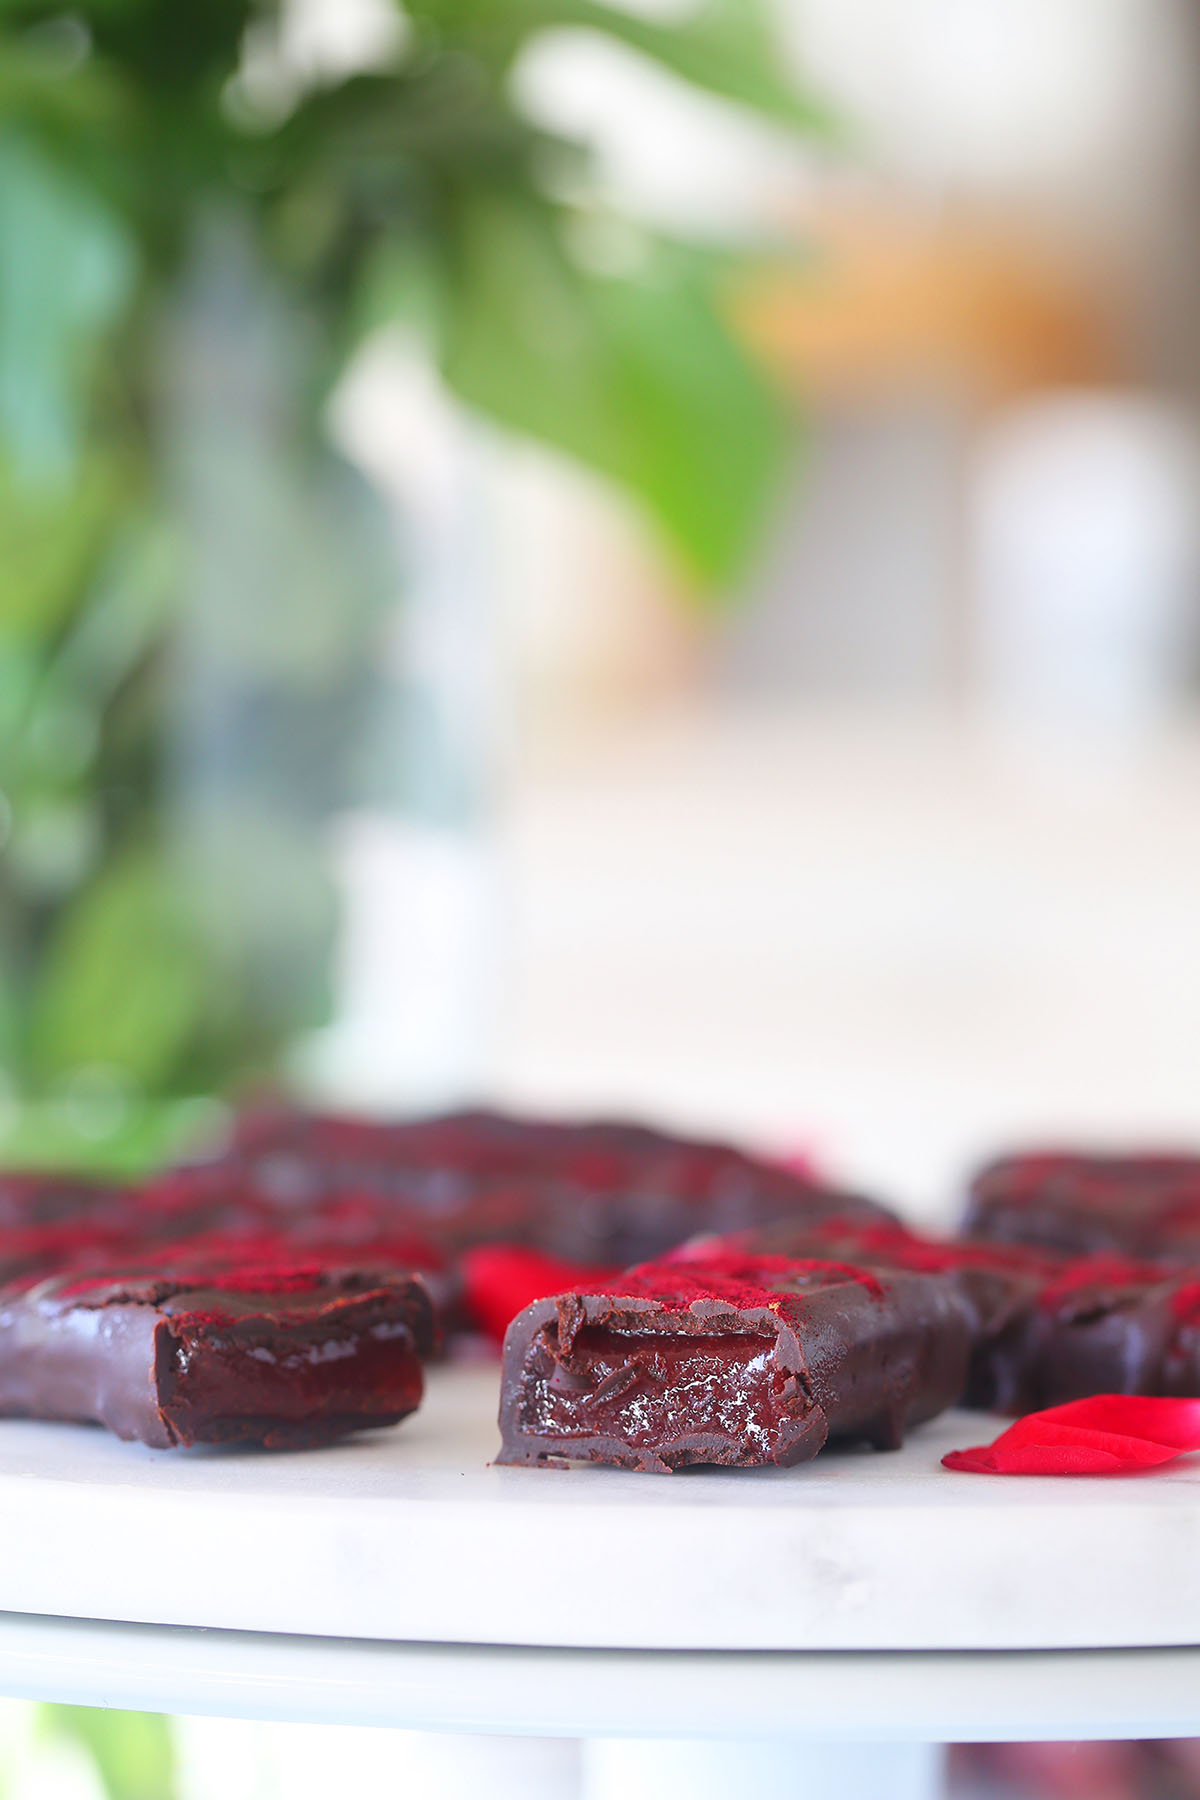 Healthy homemade TURKISH DELIGHT CHOCOLATE BARS - plant based, vegan, refined sugar free, low sugar, dairy free, gluten free, natural, beetroot 